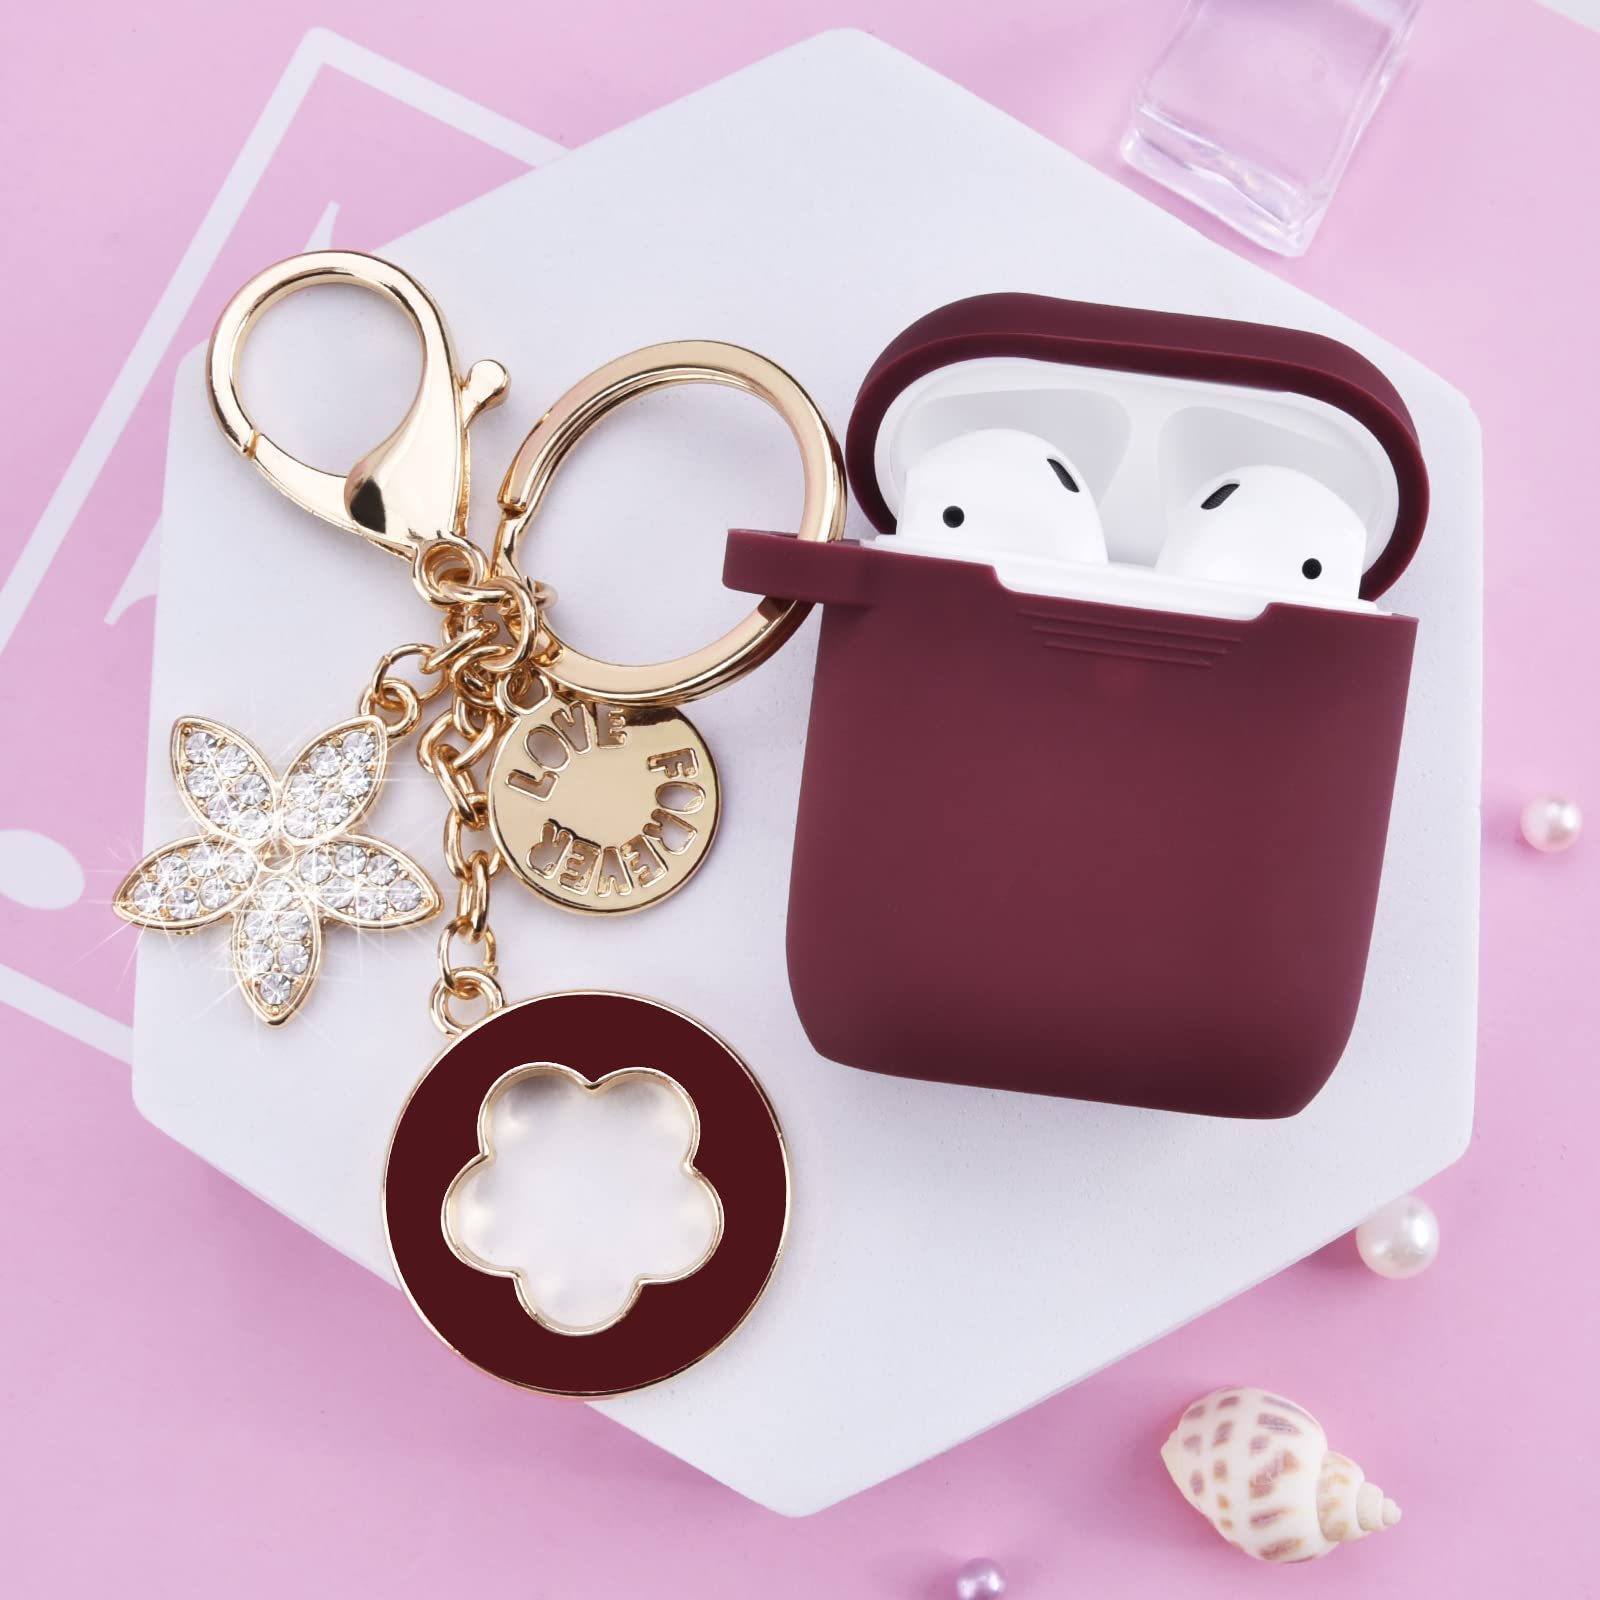 Bling AirPods 2nd Generation Case, VISOOM Cute Airpod Case 1st Generation with Keychain for Apple Airpod Case Cute Glitter Air Pod Case iPod Case Cover Women/Girls Silicone AirPods 2 Case(Burgundy)